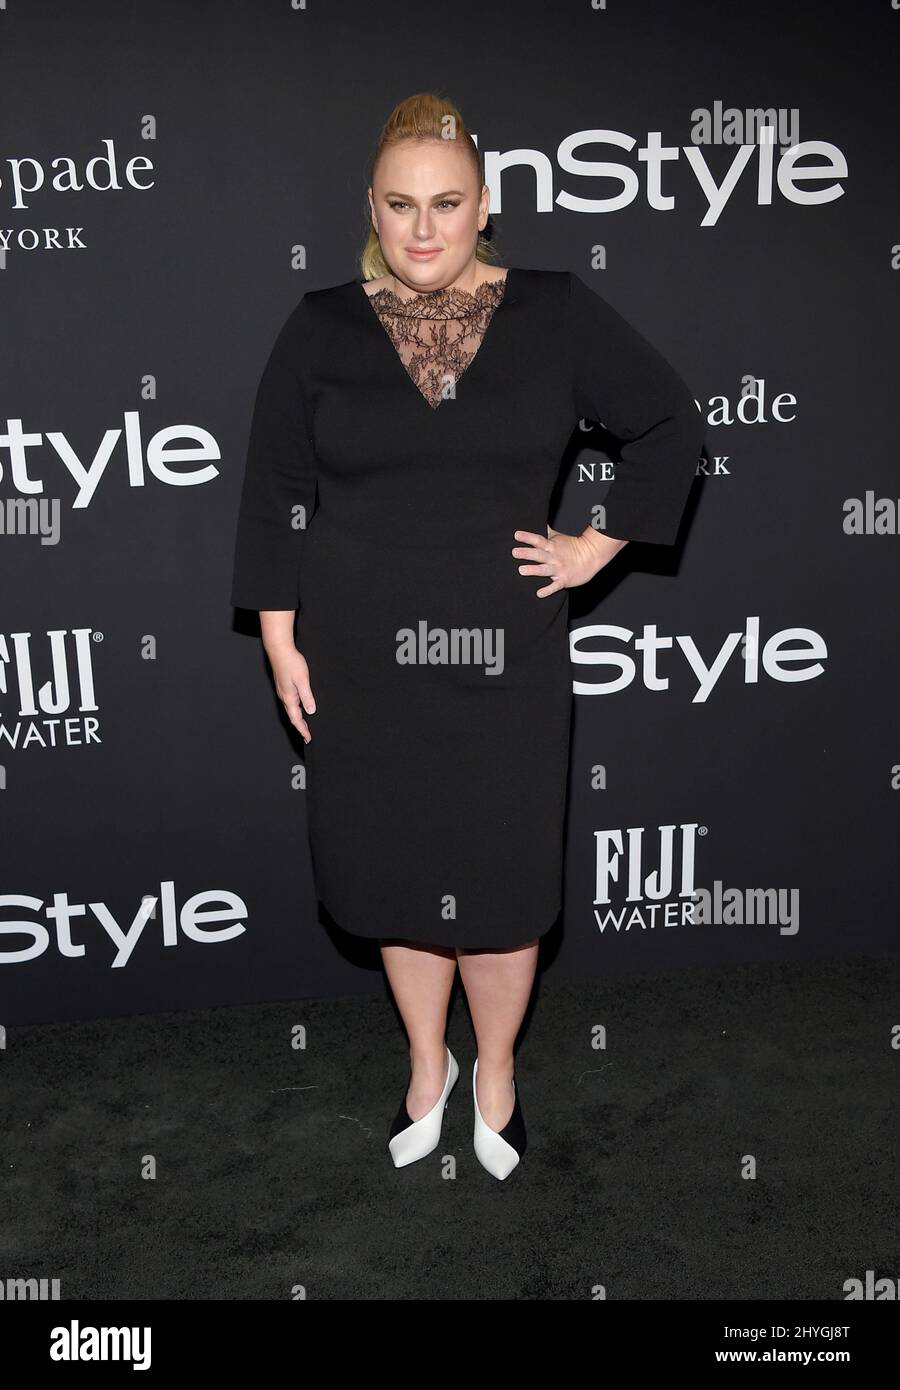 Rebel Wilson attending the fourth annual InStyle Awards, held at The ...